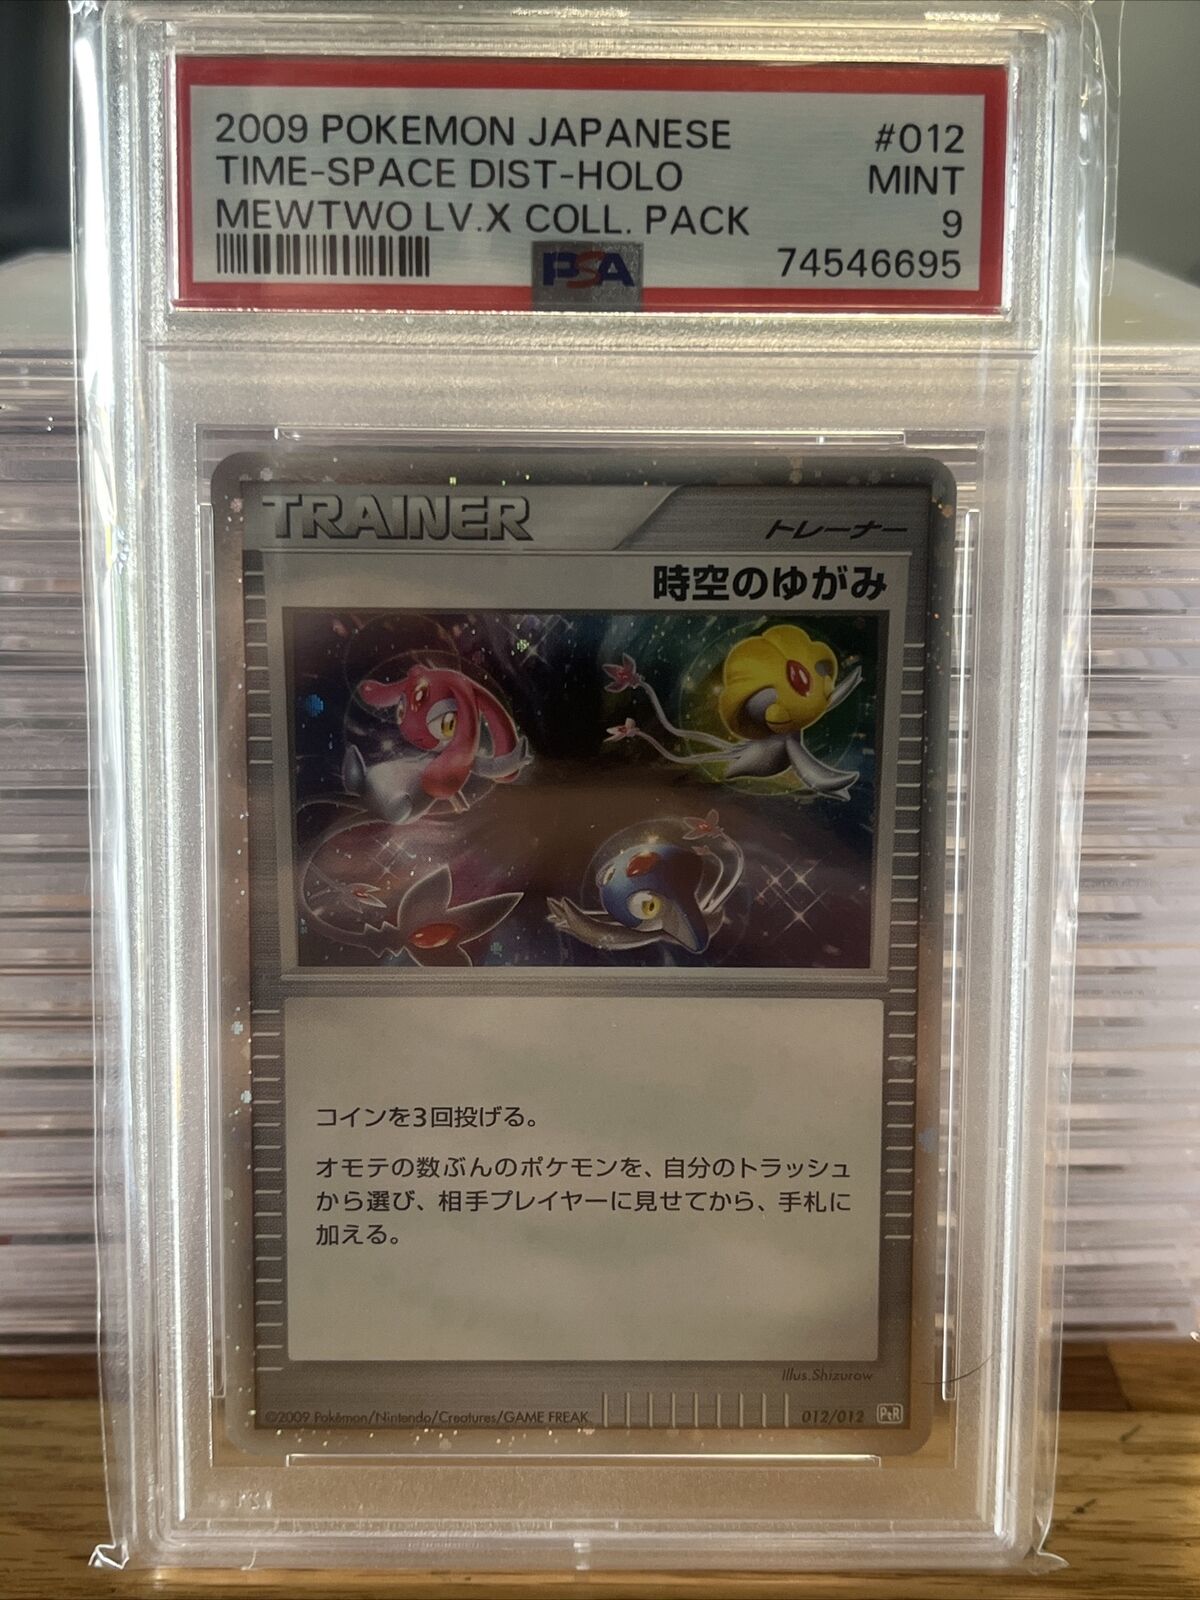 2009 Pokemon Japanese Mewtwo Lv. X Coll Pack #012 Time-Space Dist Holo PSA 9